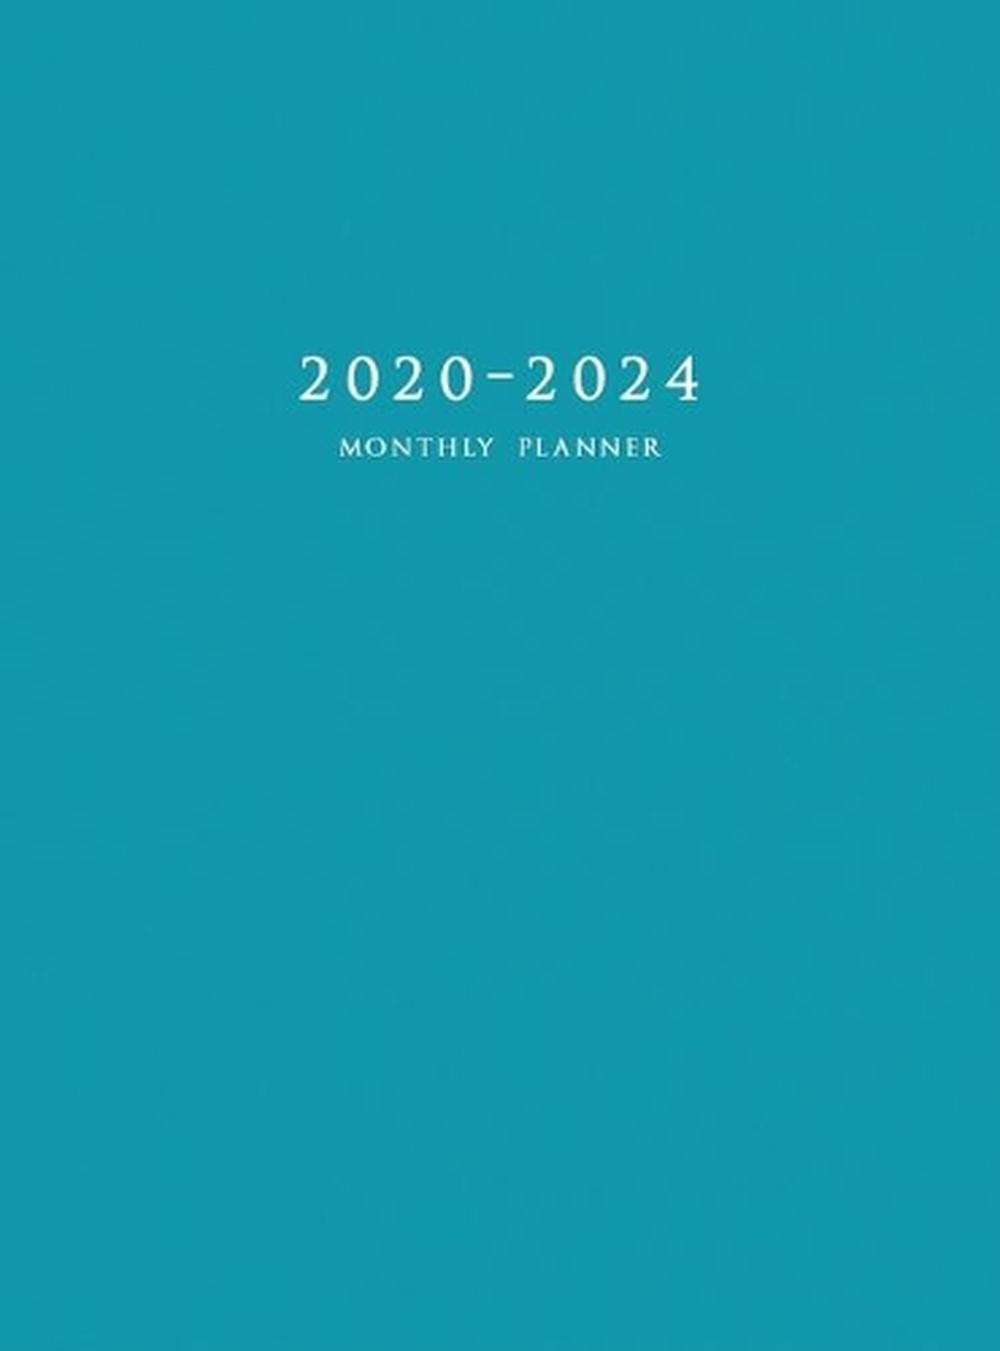 20202024 Monthly Planner by Planners Edward Planners (English